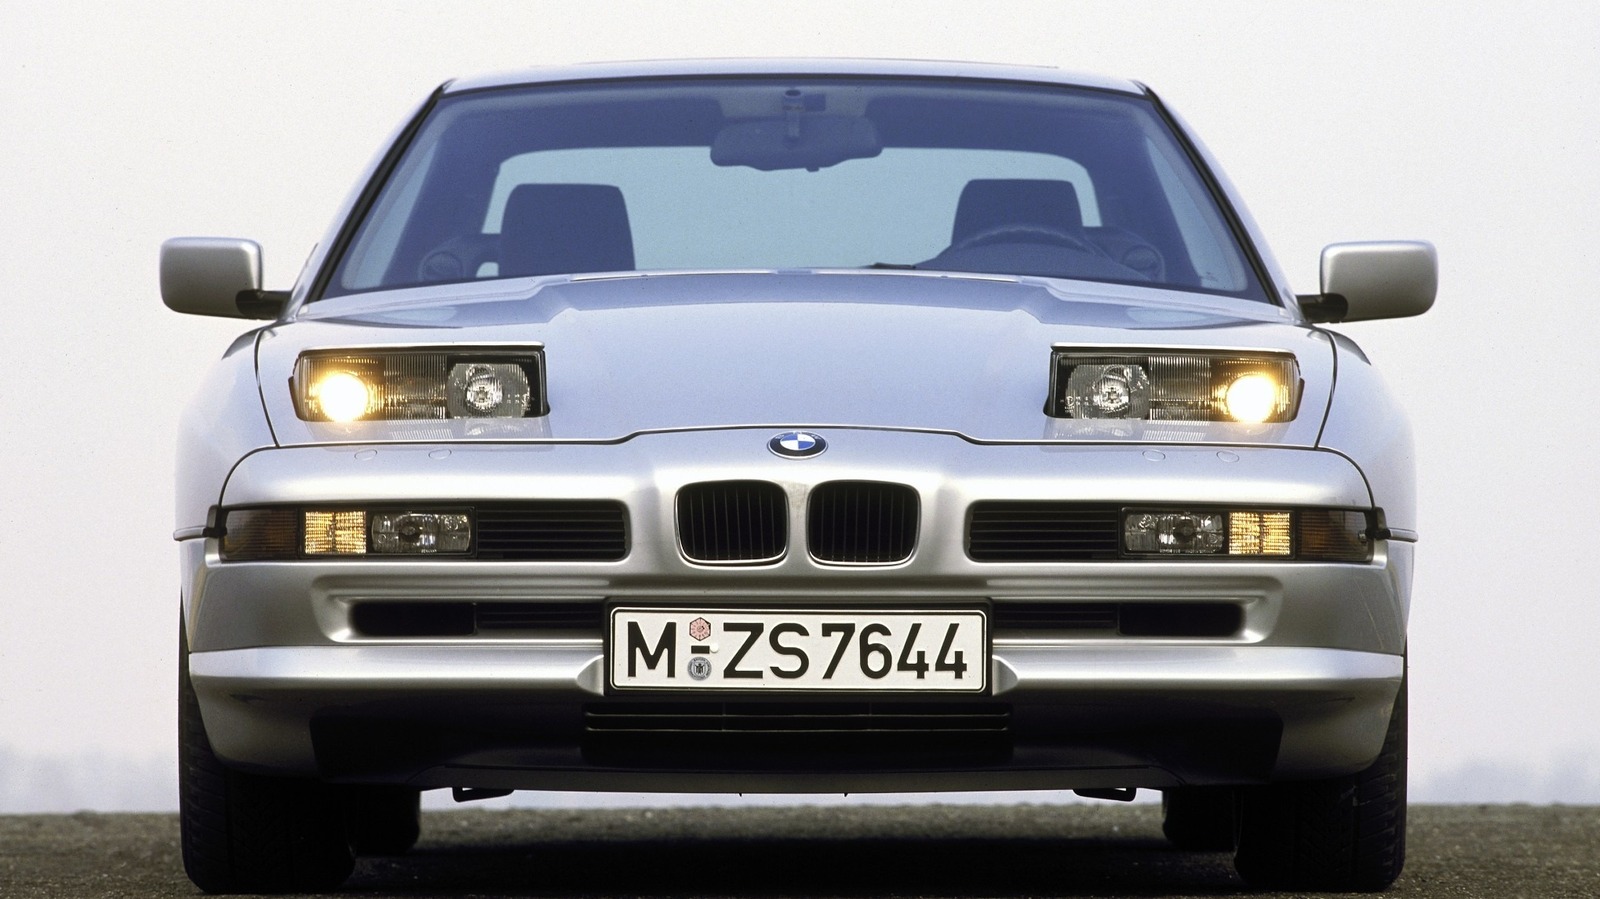 One Of The Greatest Cars Of All Time Got Its Engine From This Often Overlooked BMW Platform – SlashGear